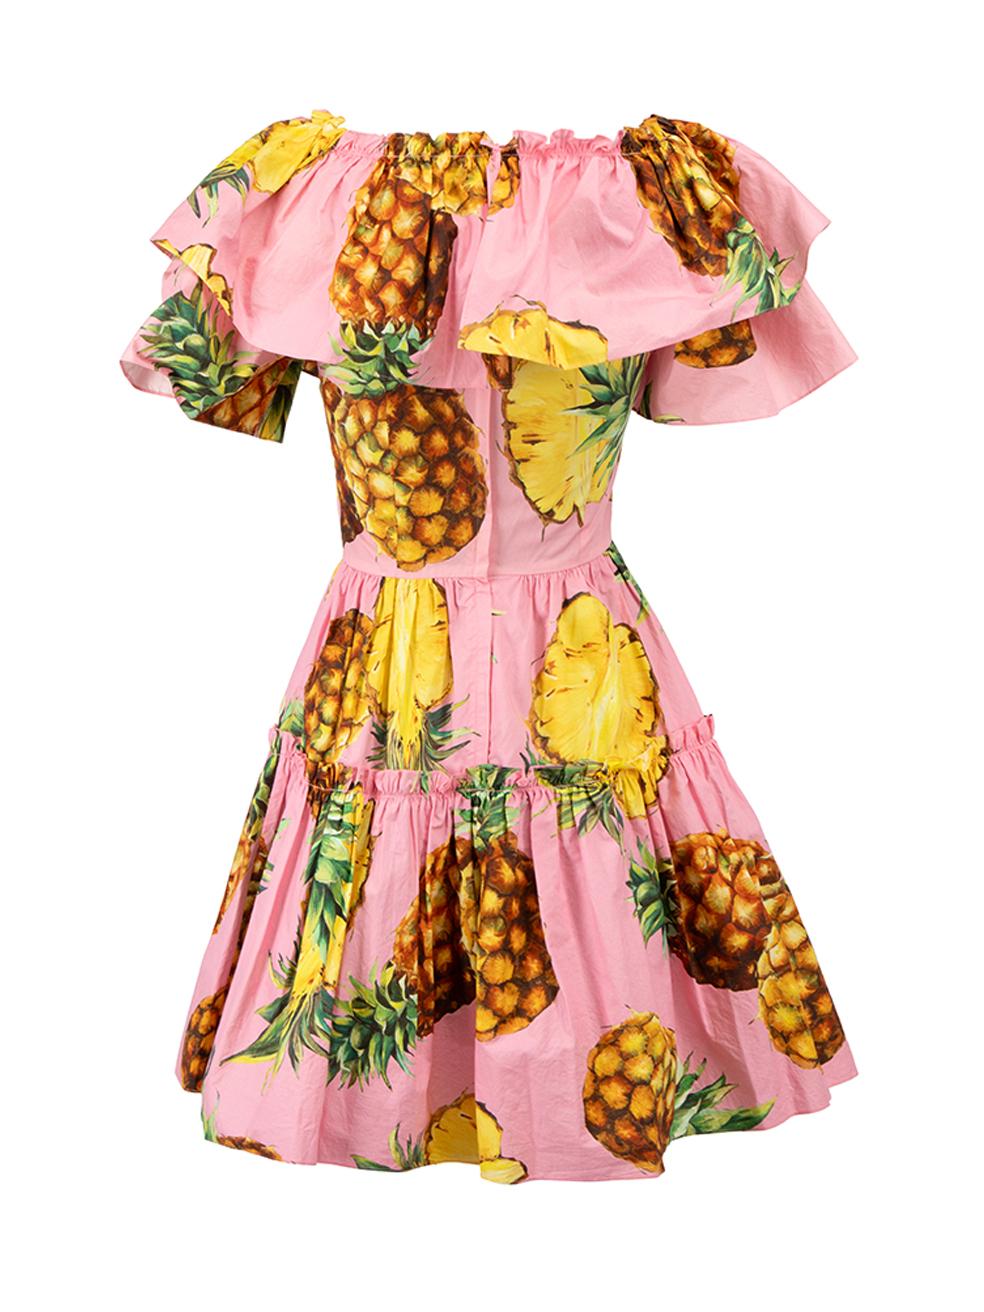 Pink Pineapple Print Off the Shoulder Mini Dress Size XXS In Good Condition For Sale In London, GB